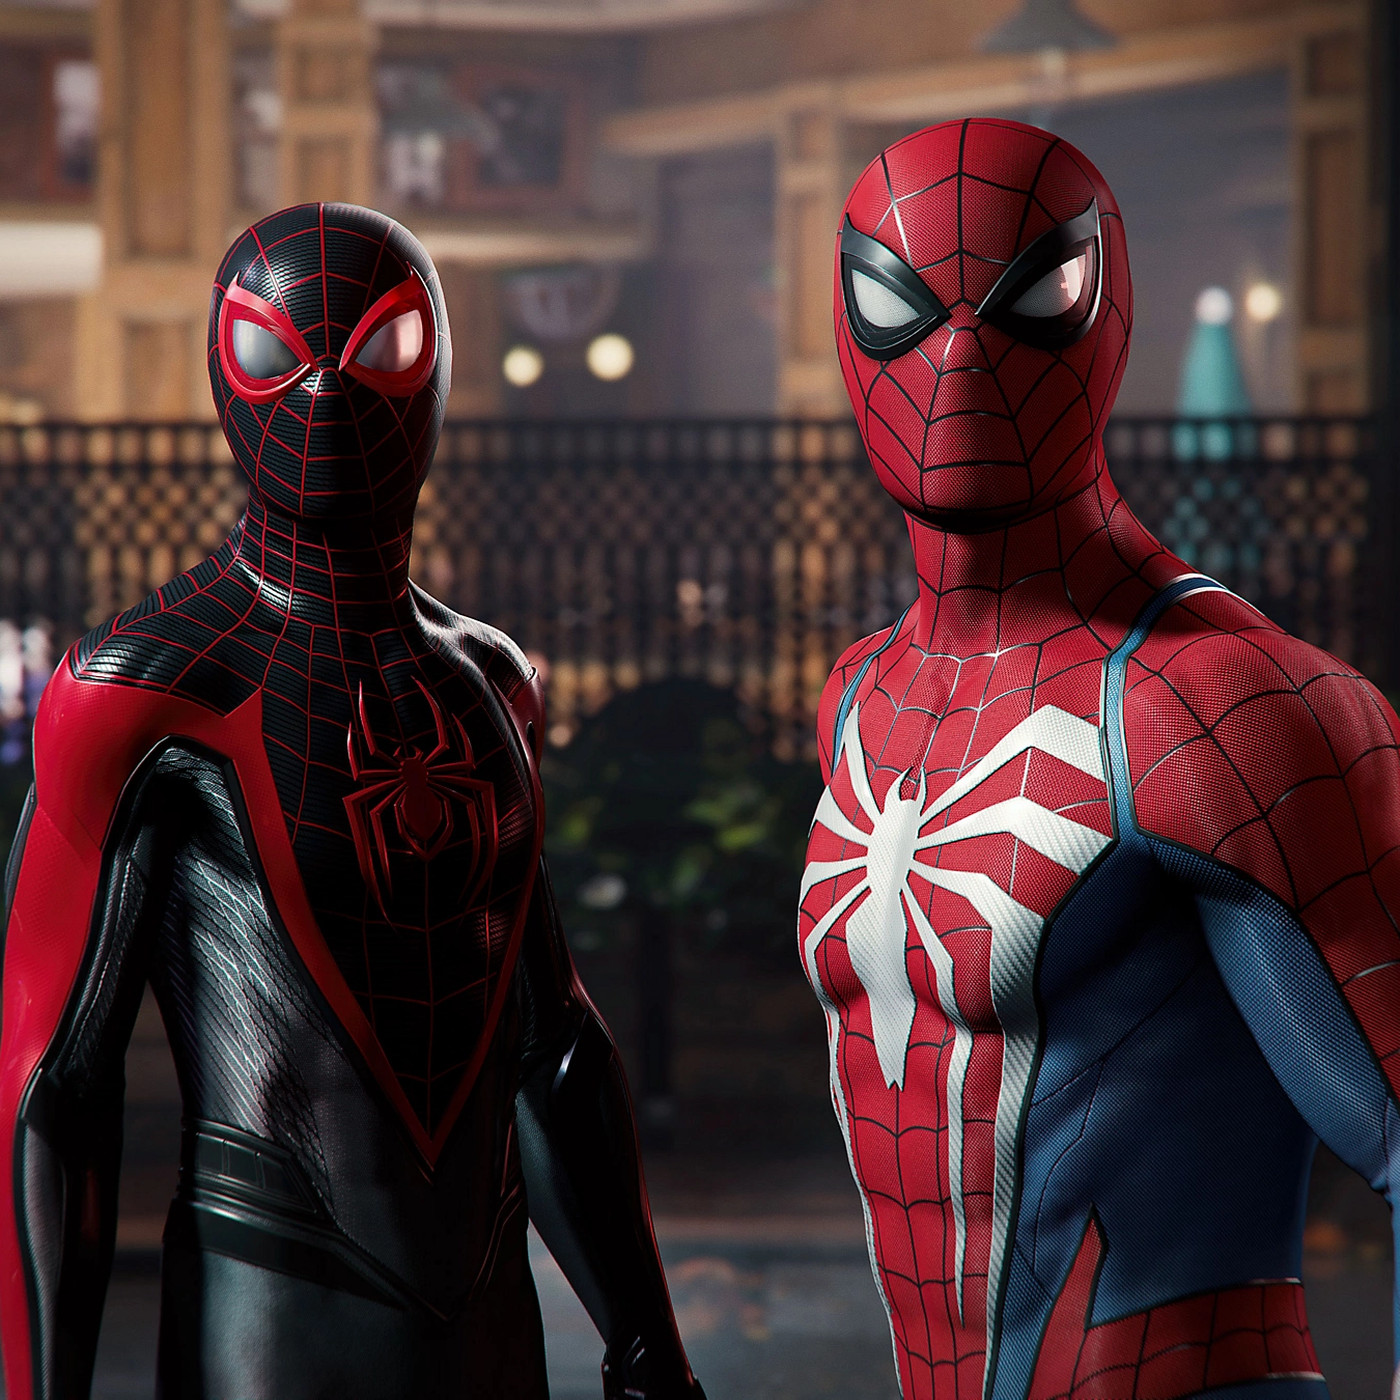 Marvel's Spider-Man 2: A Preview to the Much-Awaited Sequel